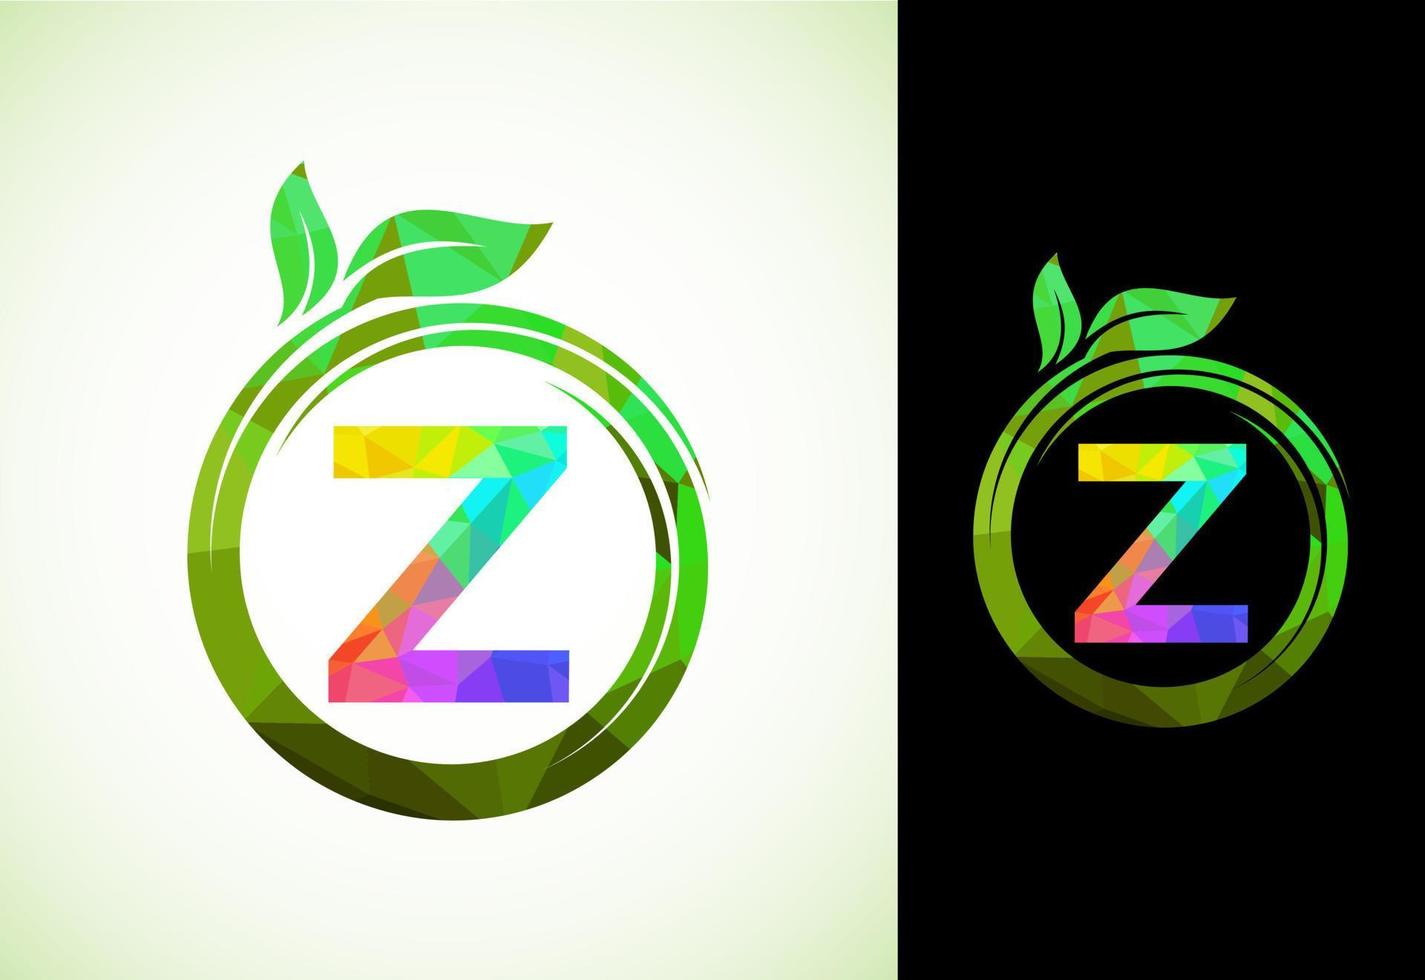 Polygonal alphabet Z in a spiral with green leaves. Nature icon sign symbol. Geometric shapes style logo design for business healthcare, nature, farm, and company identity. vector